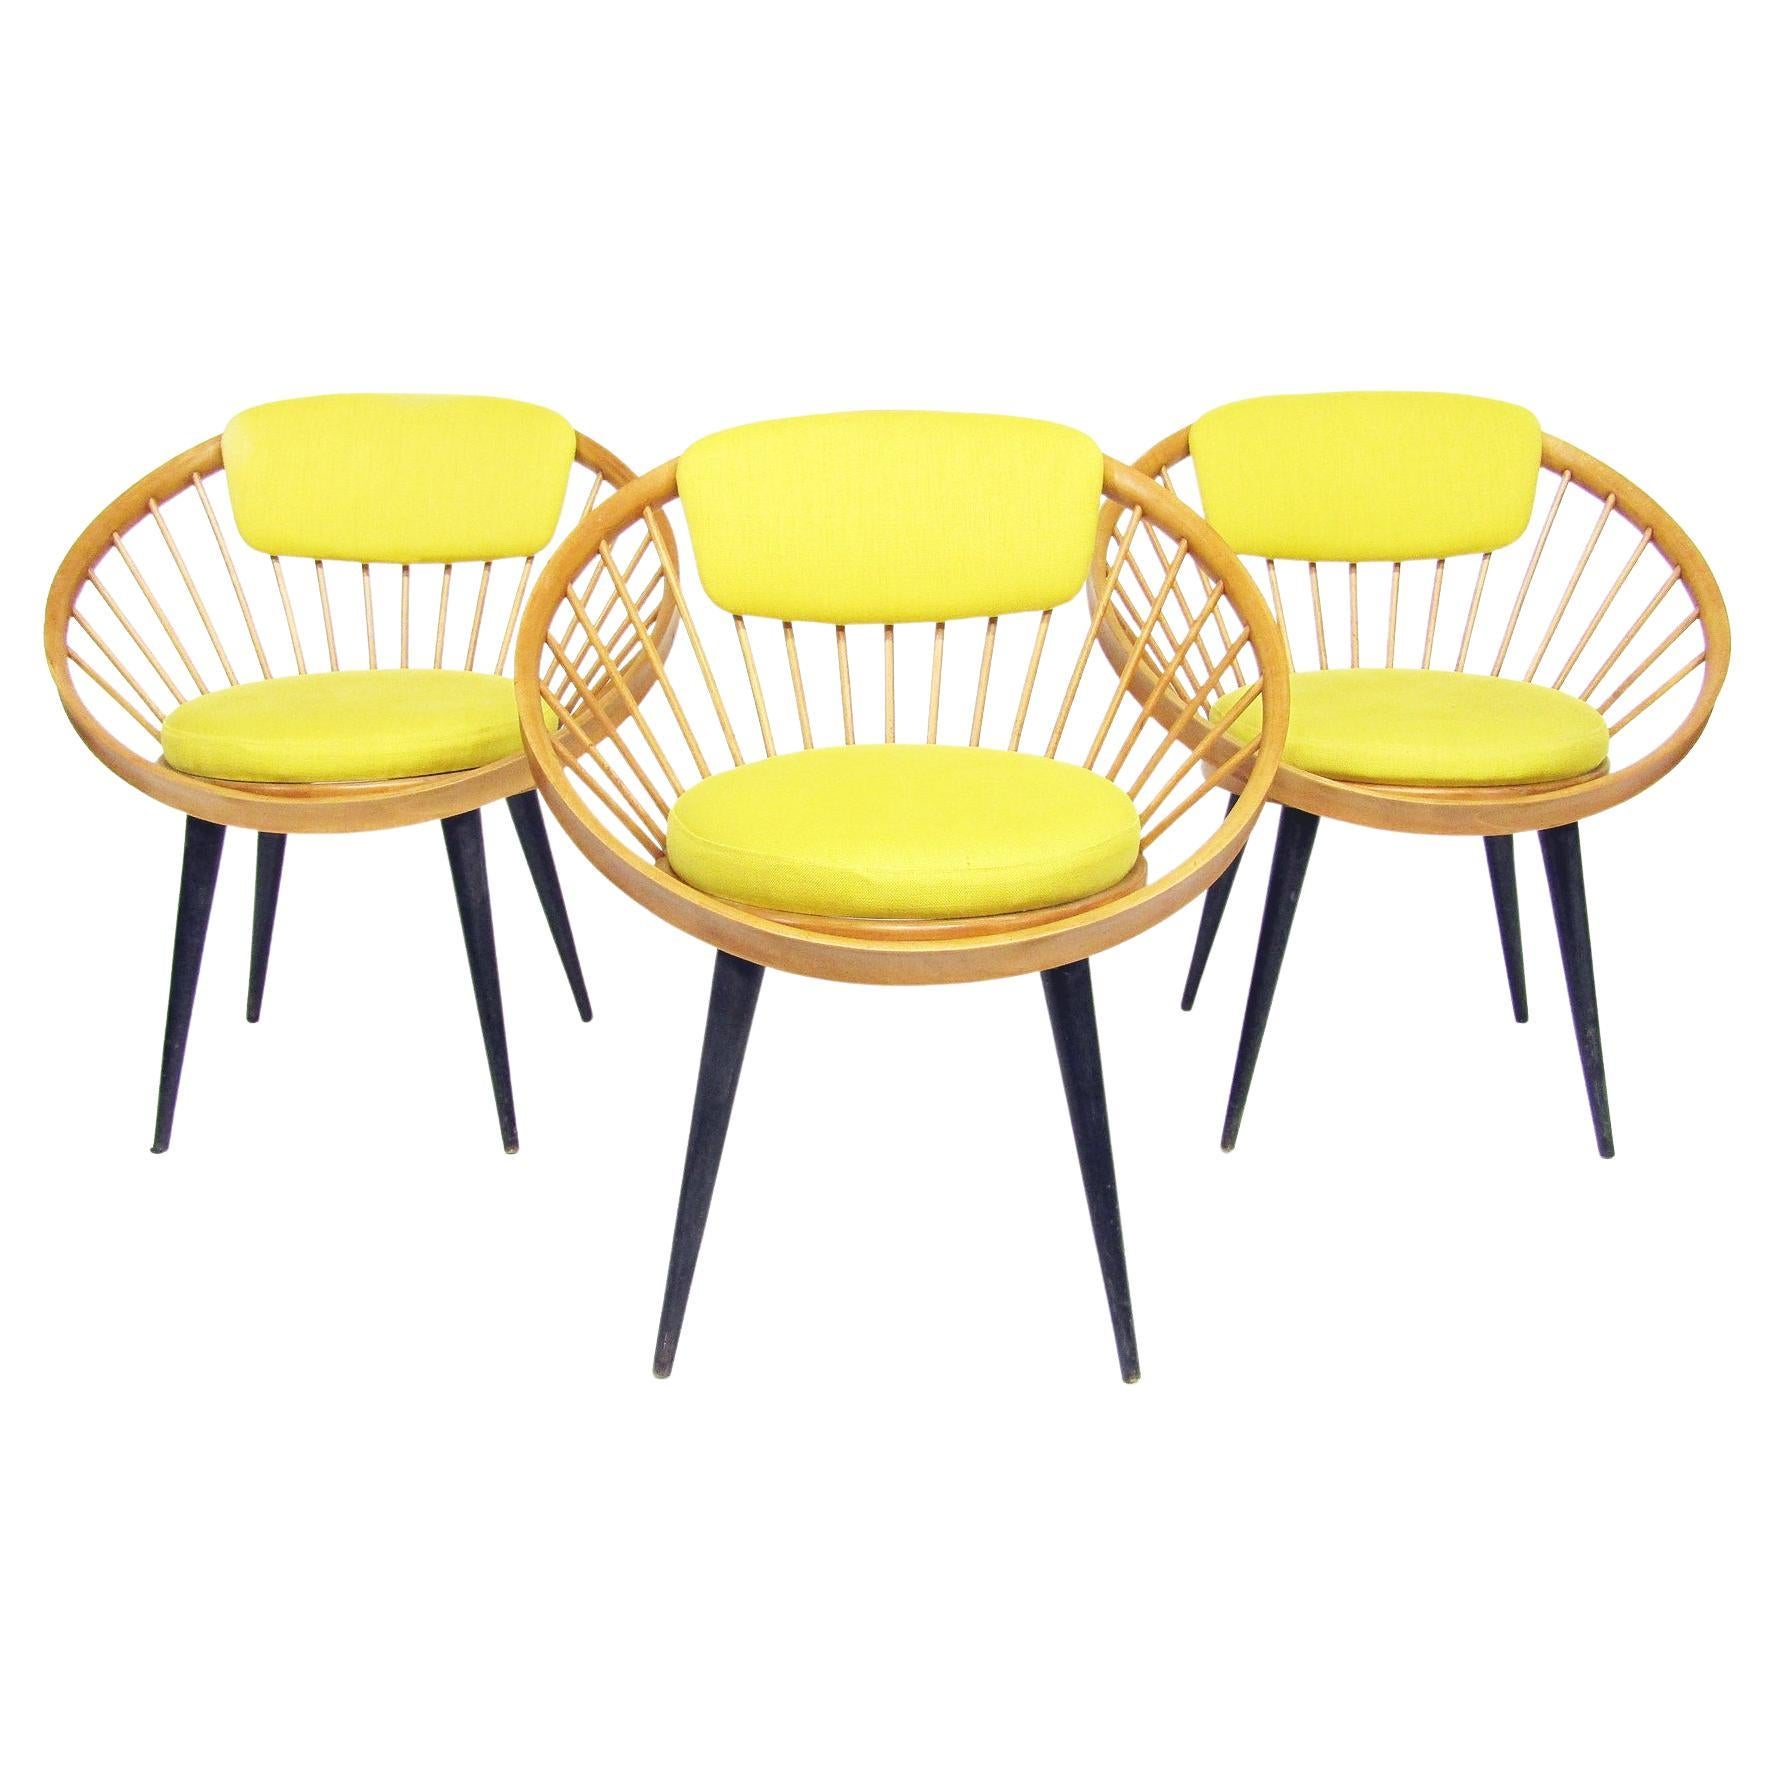 Three Swedish 1950s Cocktail "Circle" Chairs by Yngve Ekstrom for Swedese For Sale